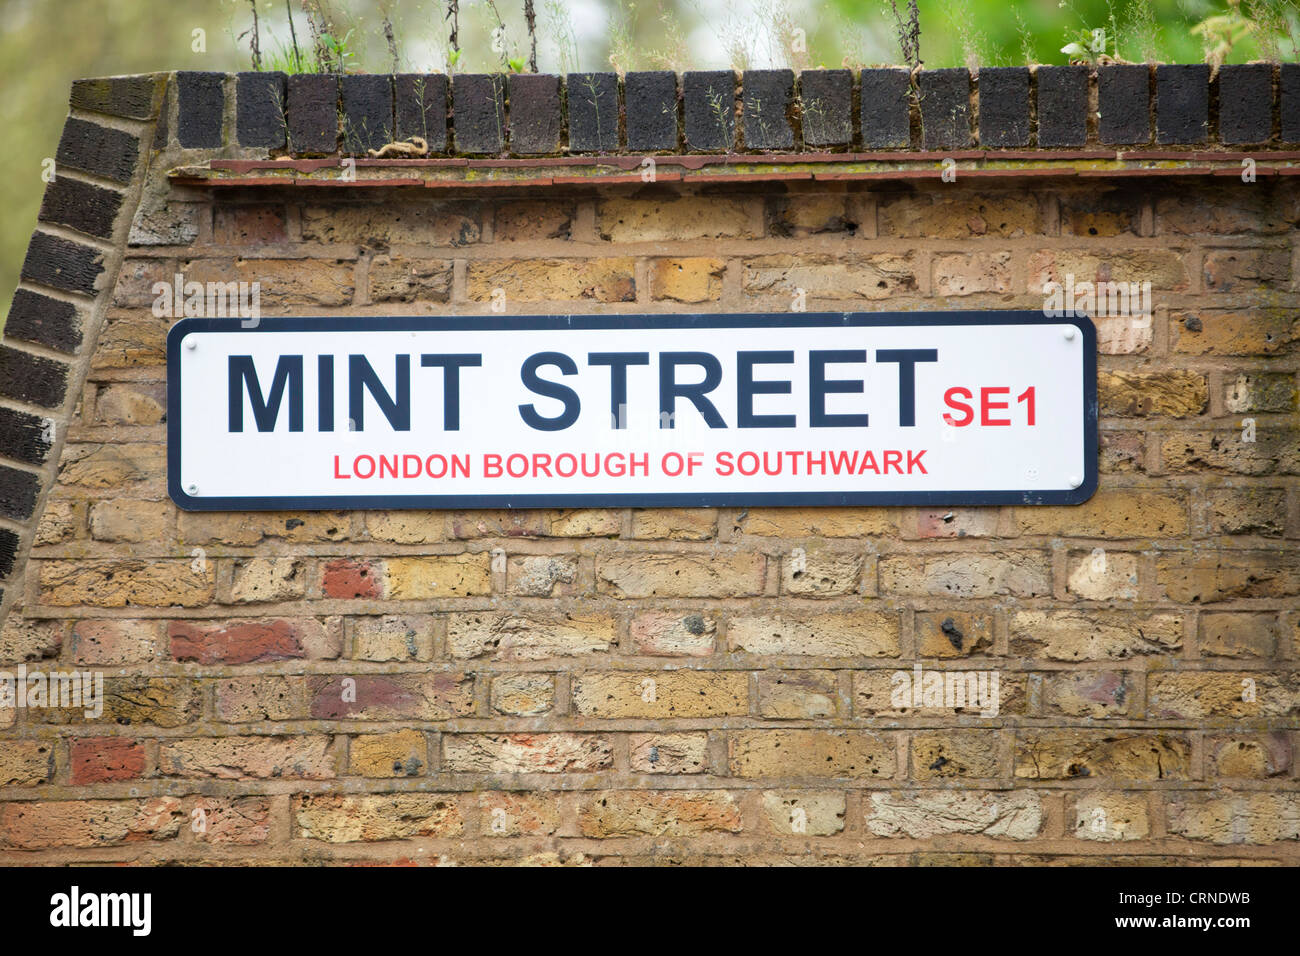 Mint Street SE1 road sign in the London Borough of Southwark. Stock Photo